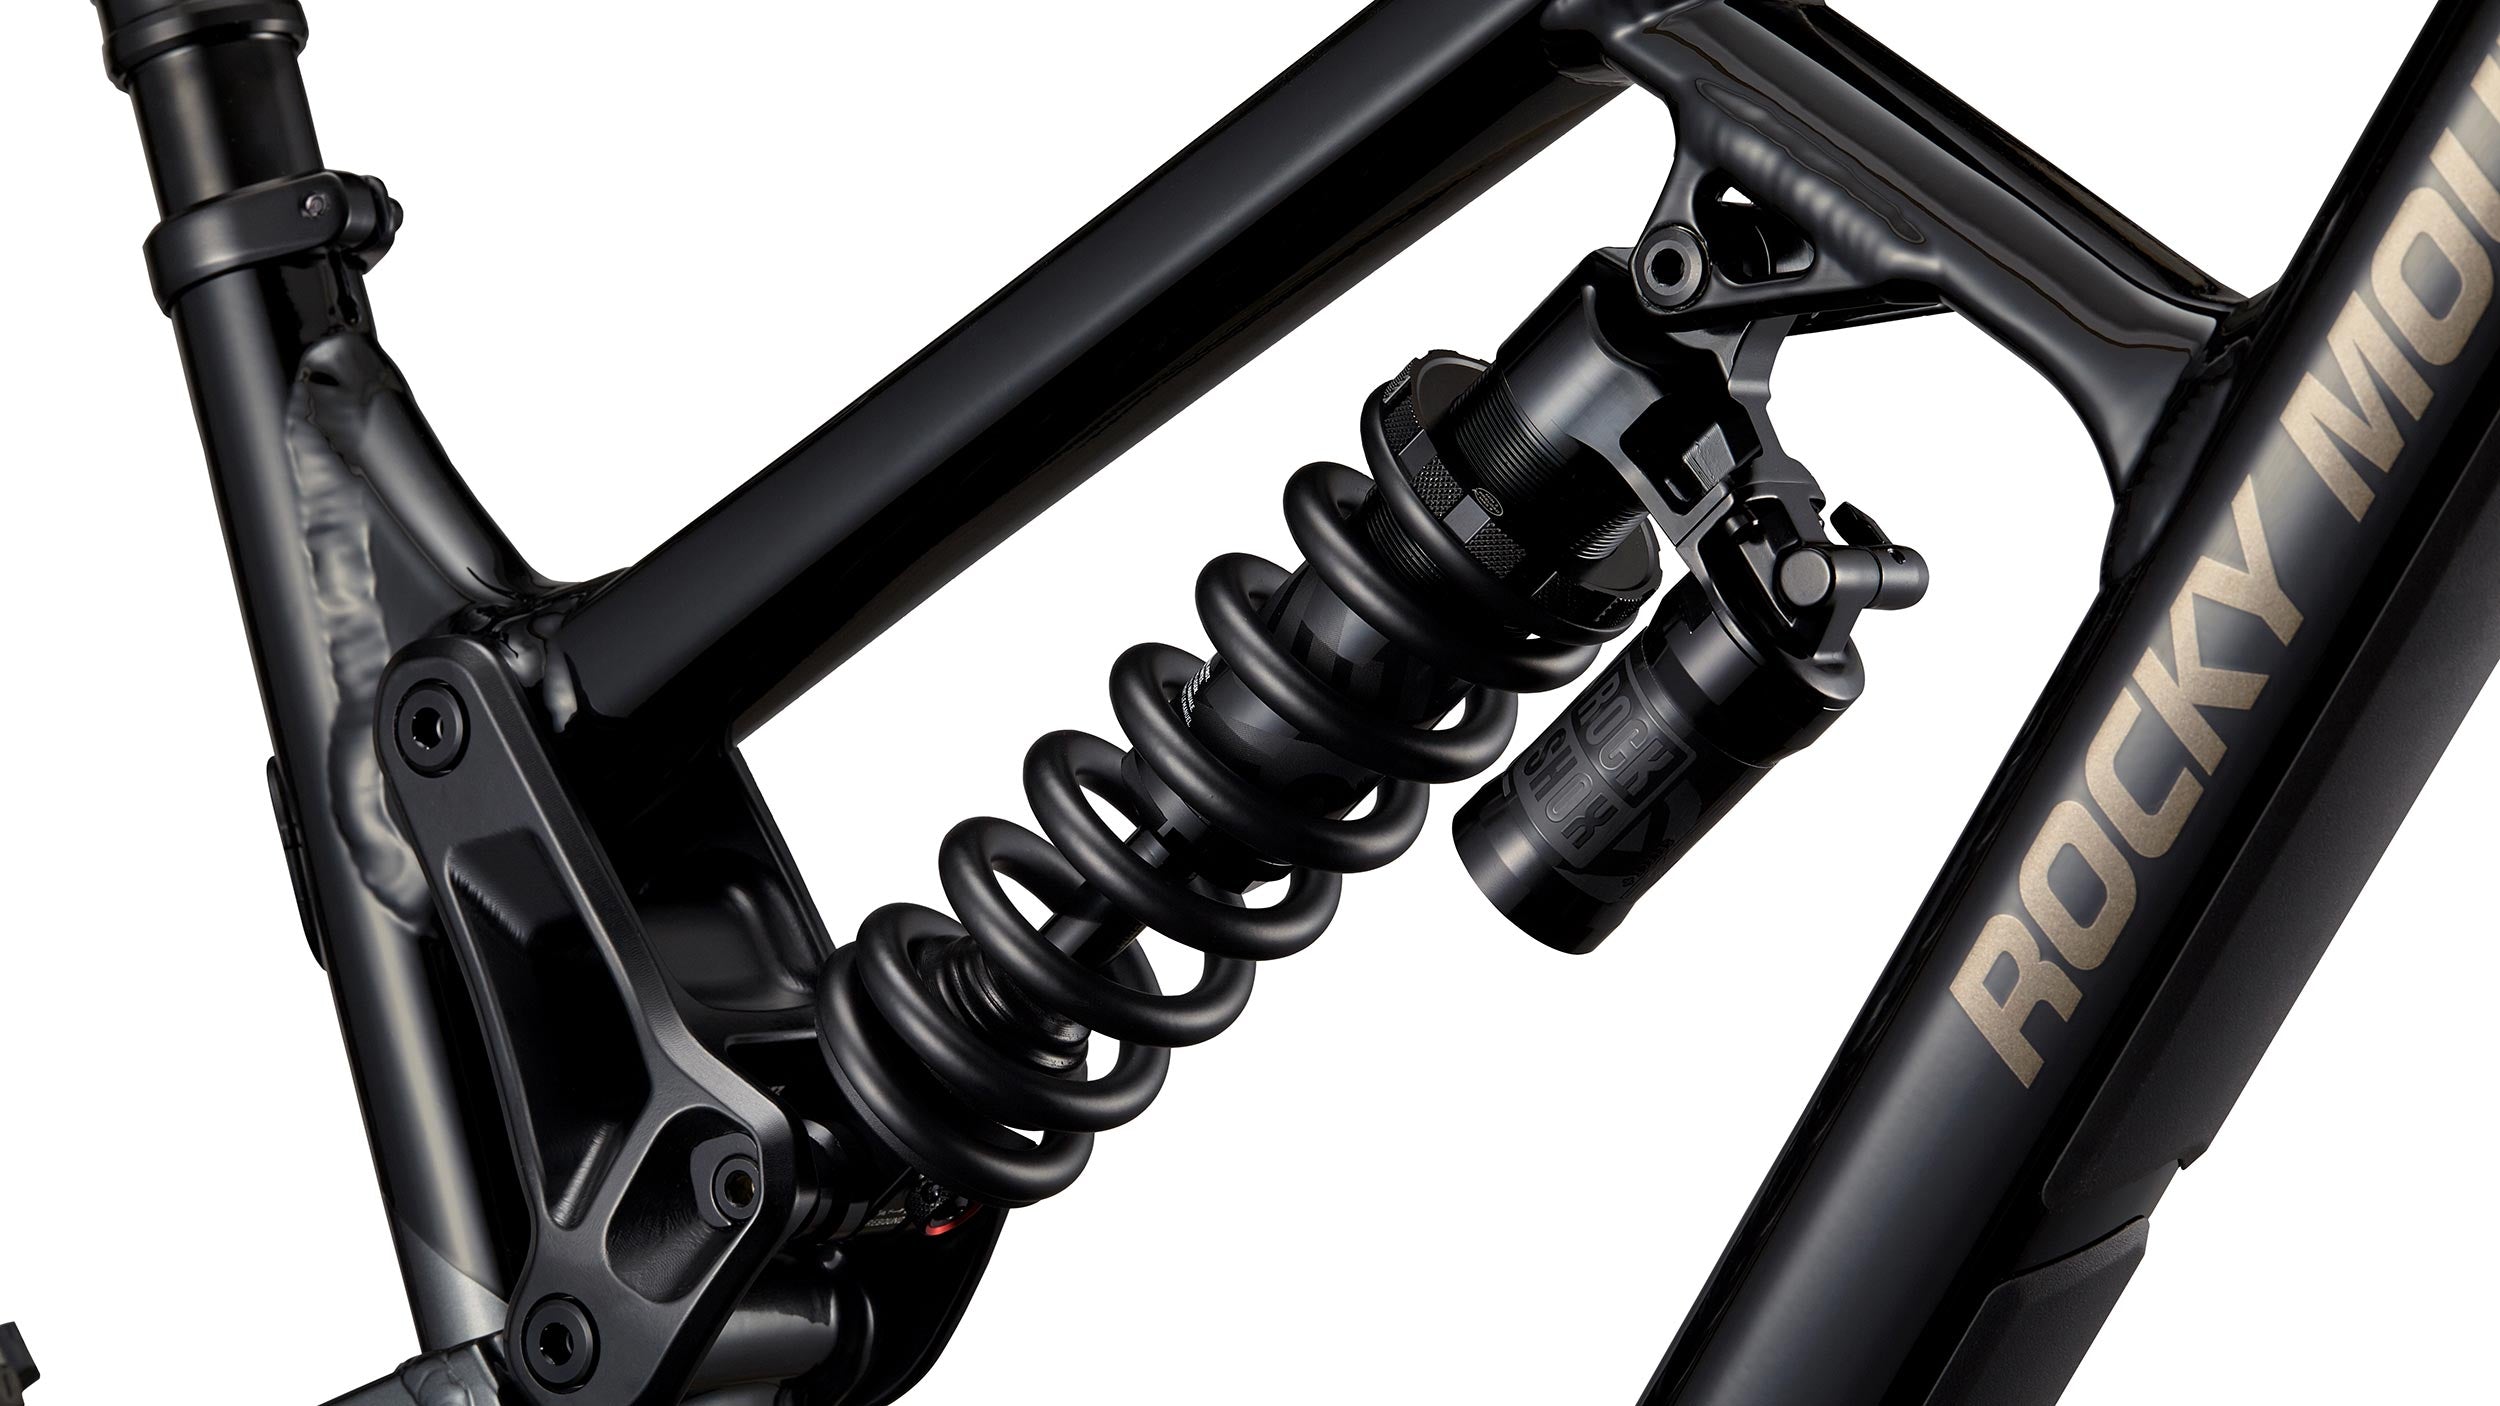 _caption_The Slayer Alloy 50 features the RockShox Super Deluxe Coil Select+ , ensuring a smooth and plush ride on the descents while allowing an efficient ride on the climbs thanks to its compression lockout.